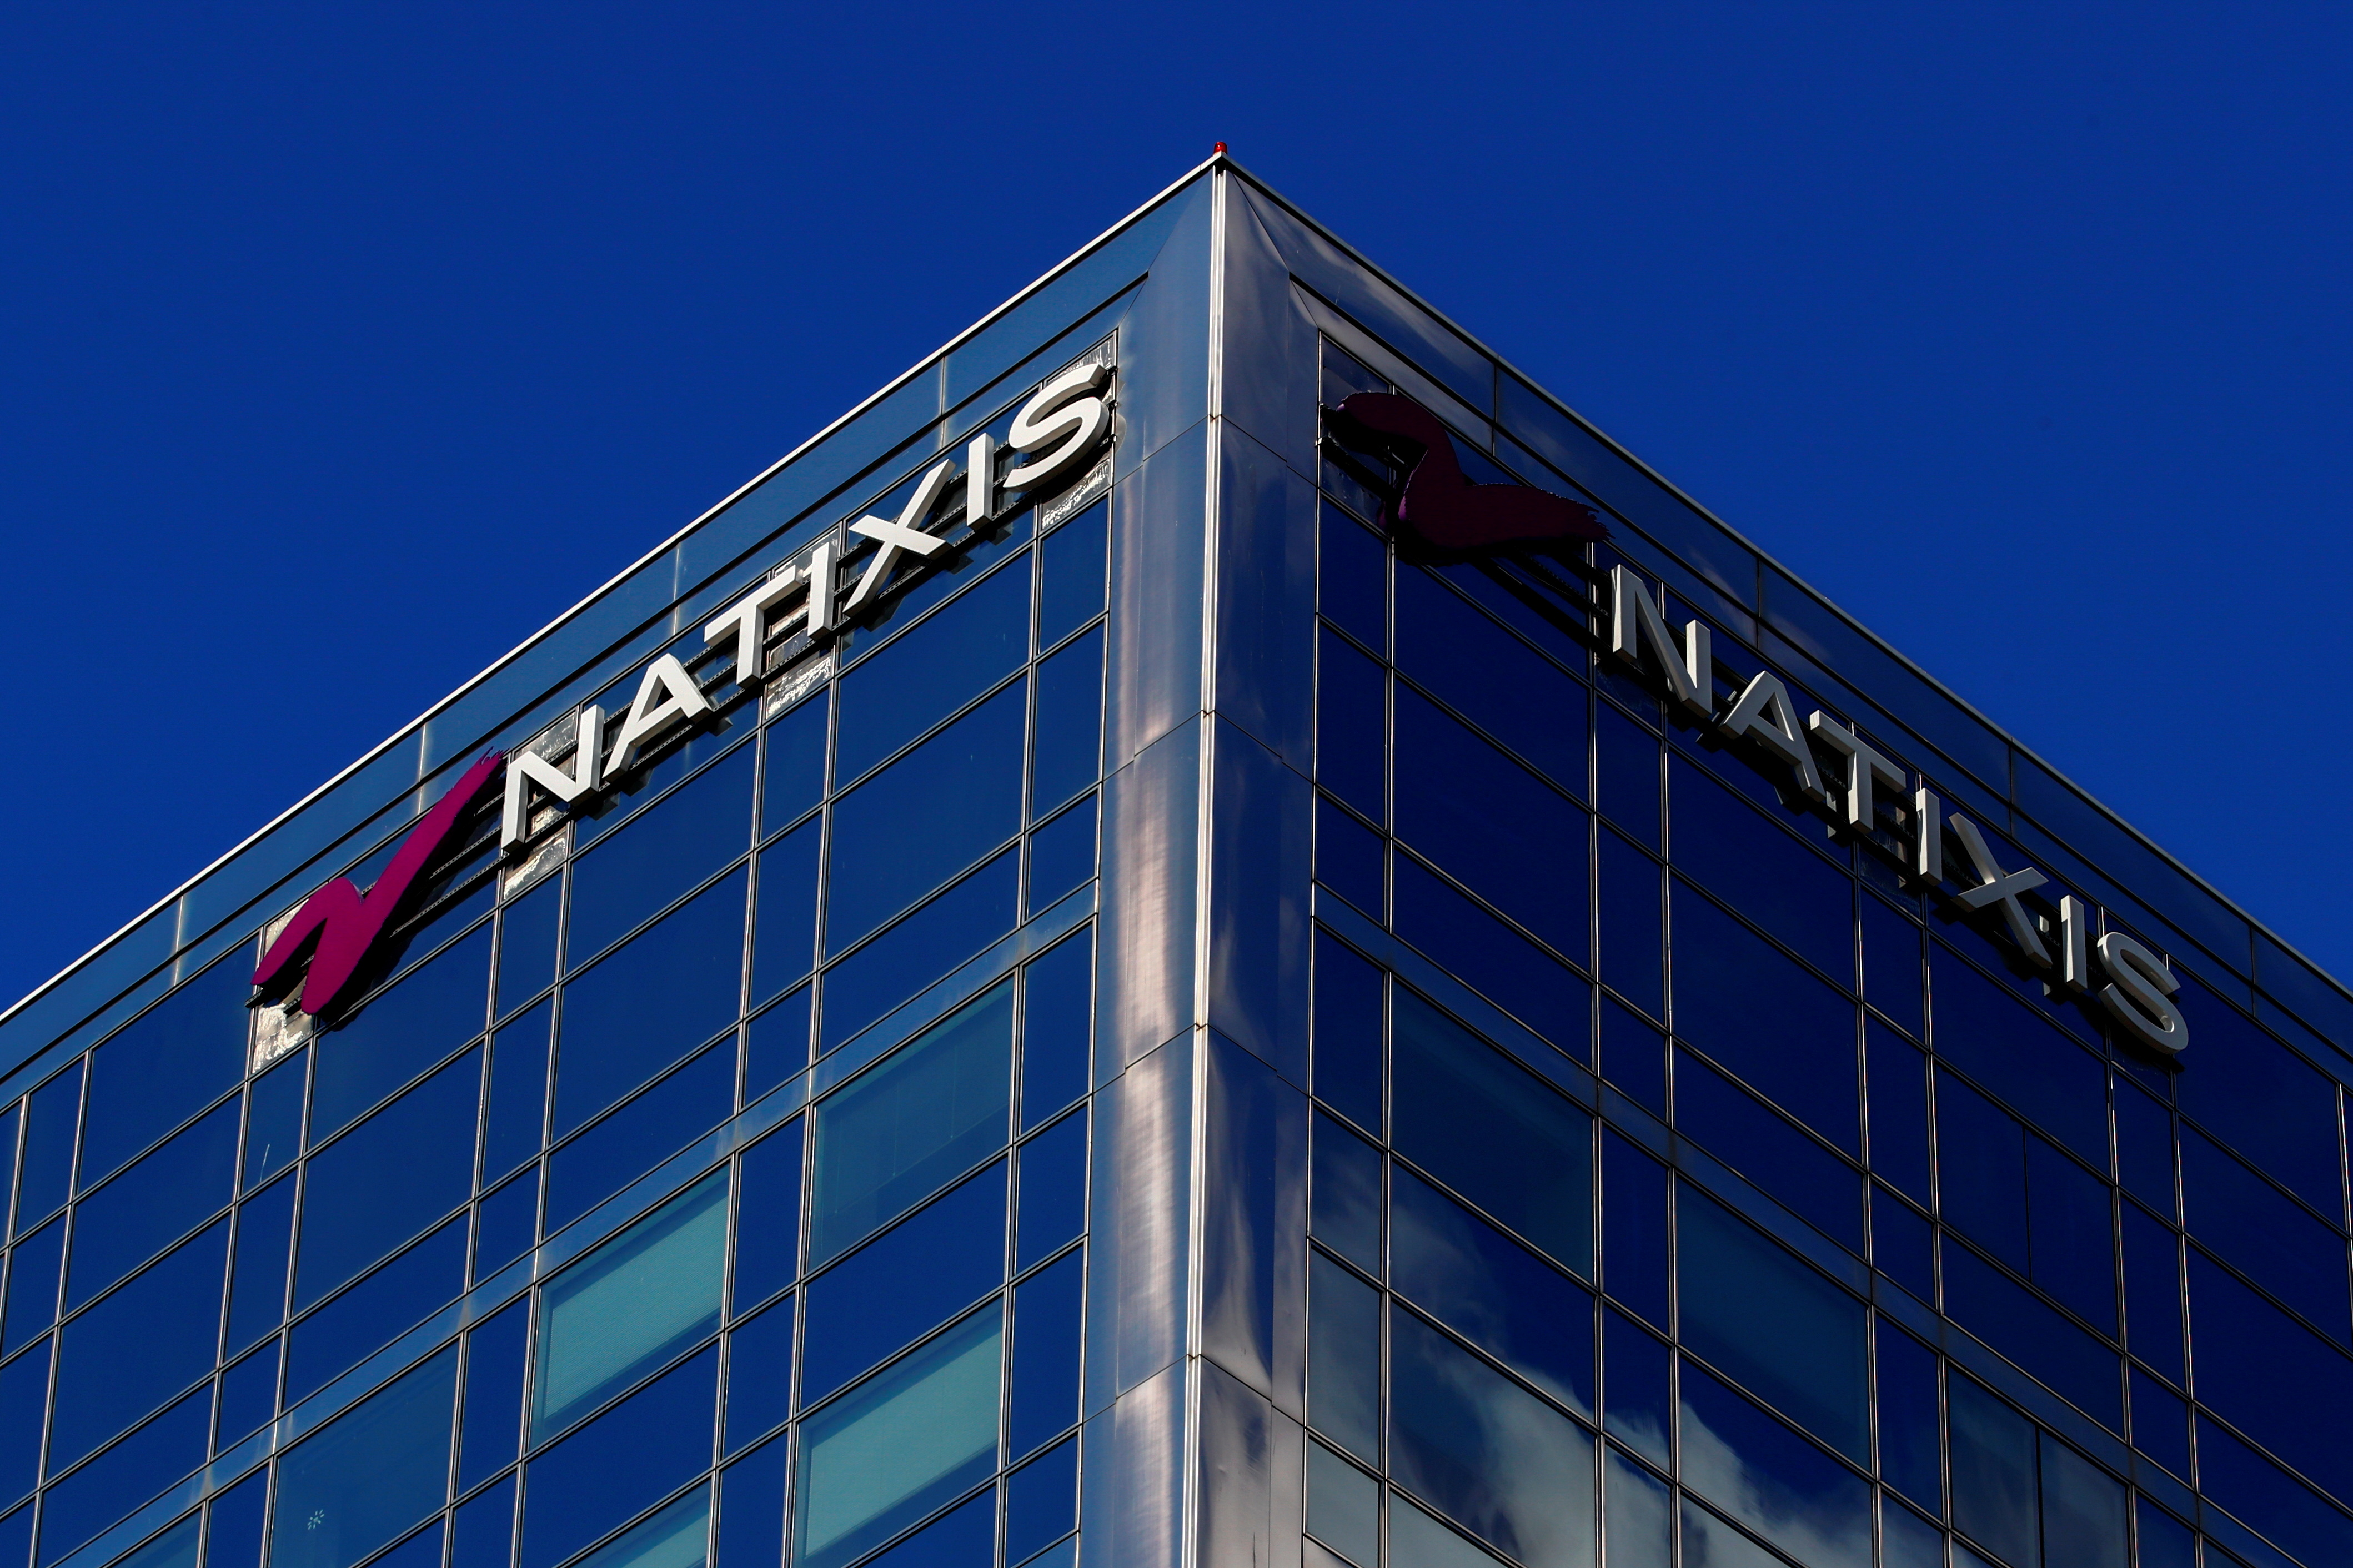 The logo of French bank Natixis is seen on one of their buildings in Paris